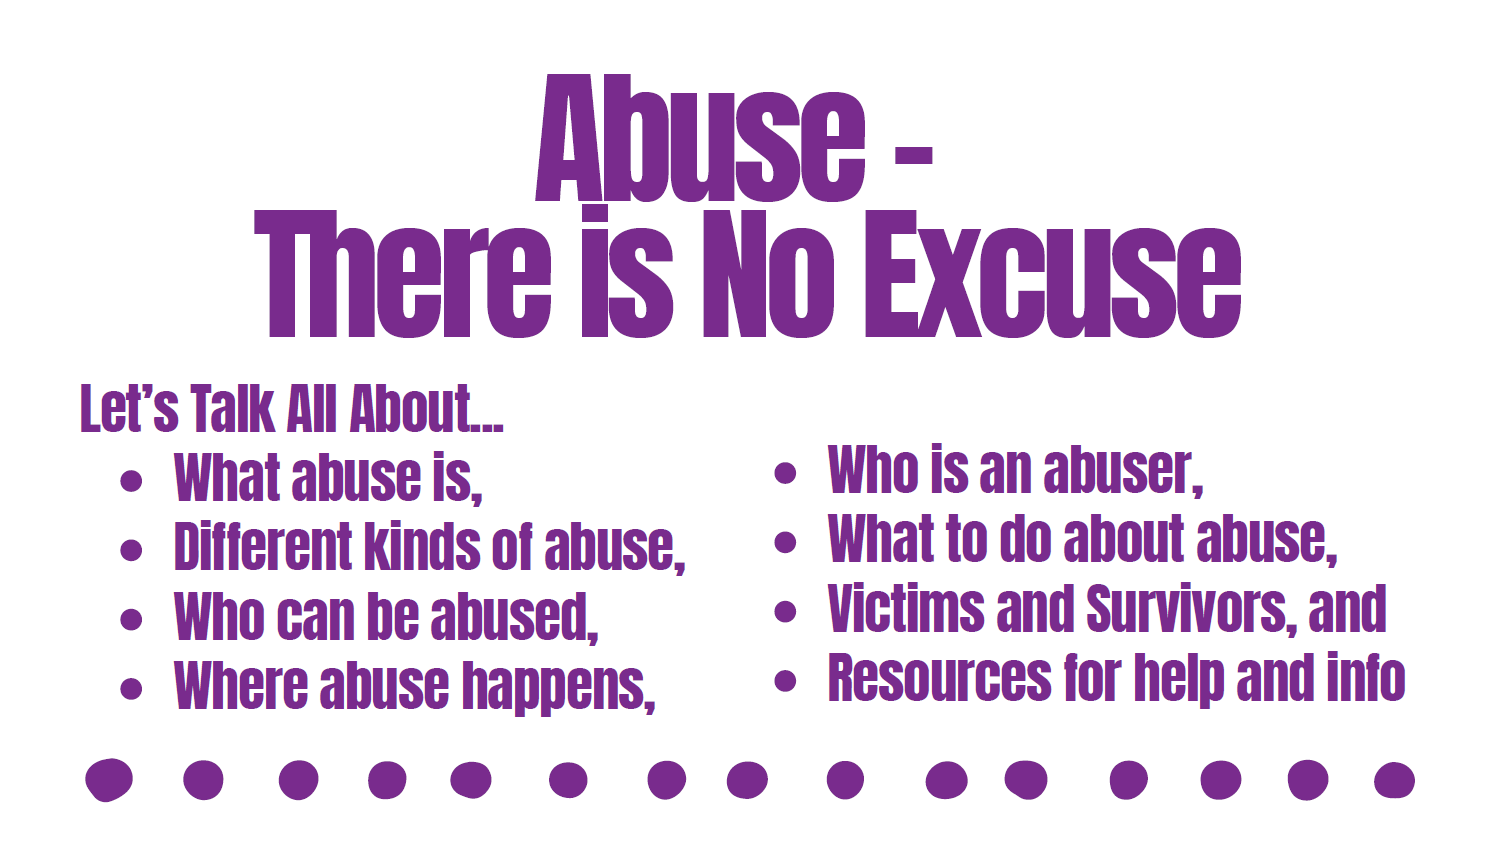 Banner. Text reads Abuse - There is No Excuse Let's Talk All About what abuse is, different kinds of abuse, who can be abused, where abuse happens, who is an abuser, what to do about abuse, victims and survivors, and resources for help and info.